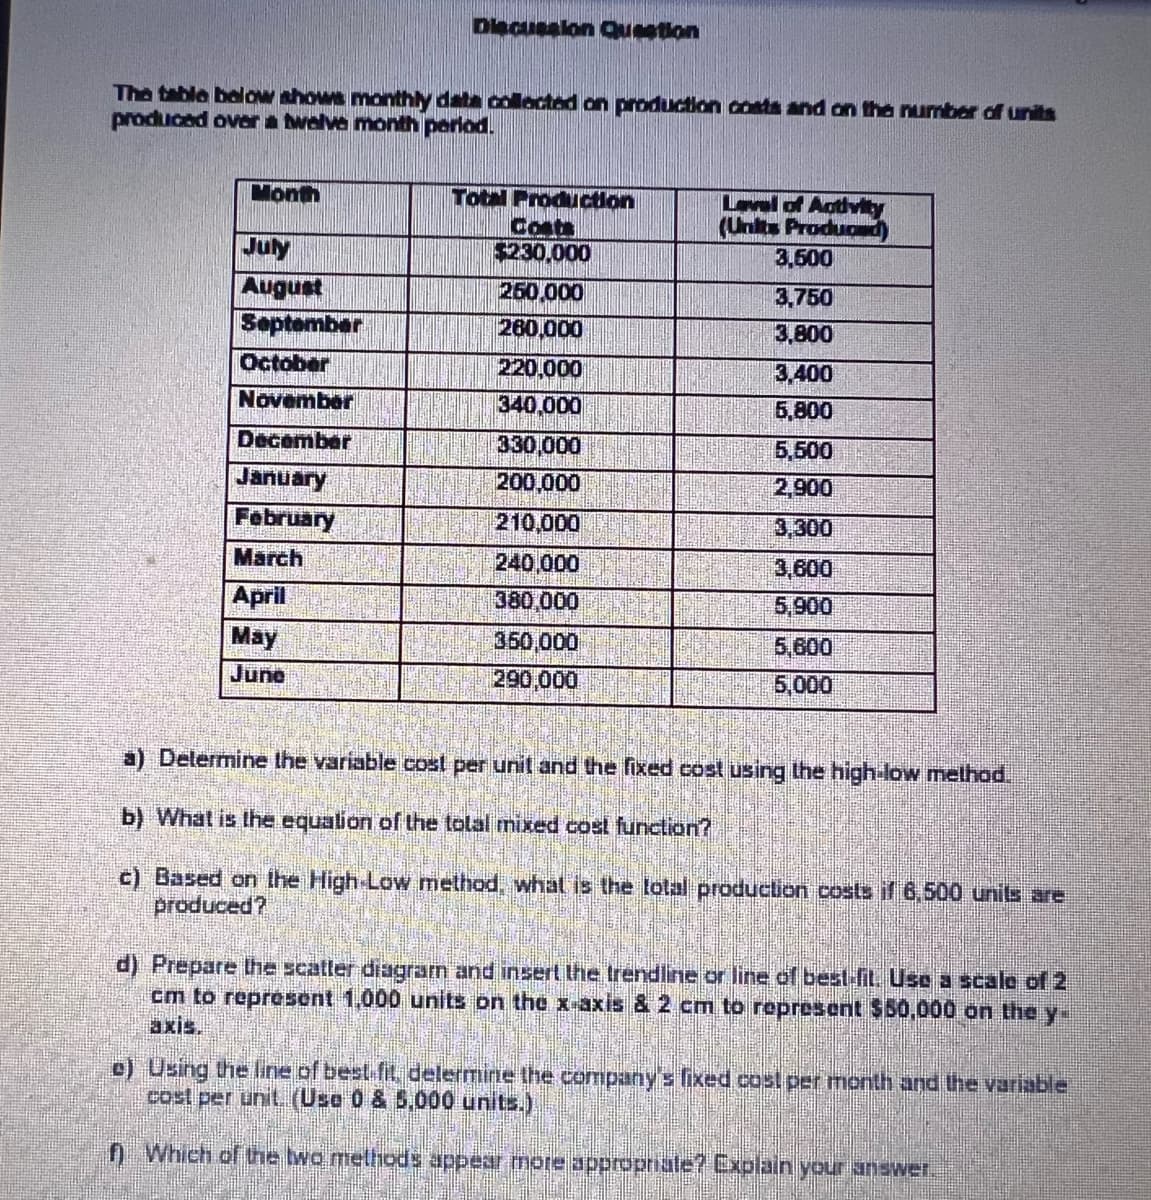 The table below shows monthly data collected on production costs and on the number of units
produced over a twelve month period.
Month
Discussion Question
July
August
September
October
November
December
January
February
March
April
May
June
Total Production
Costs
$230,000
250,000
260,000
220,000
340,000
330,000
200,000
210,000
240,000
380,000
360,000
290,000
Level of Activity
(Units Produced)
3,500
3,750
3,800
3,400
5,800
5,500
2,900
3,300
3,600
5,900
5,600
5,000
a) Determine the variable cost per unit and the fixed cost using the high-low method.
b) What is the equation of the total mixed cost function?
c) Based on the High-Low method, what is the total production costs if 6,500 units are
produced?
d) Prepare the scatter diagram and insert the trendline or line of best-lit. Use a scale of 2
cm to represent 1,000 units on the x-axis & 2 cm to represent $50,000 on the y-
e) Using the line of best fit delermine the company's lixed cost per month and the variable
cost per unit (Use 0 & 5,000 units.)
f) Which of the two methods appear more appropriate? Explain your answer.